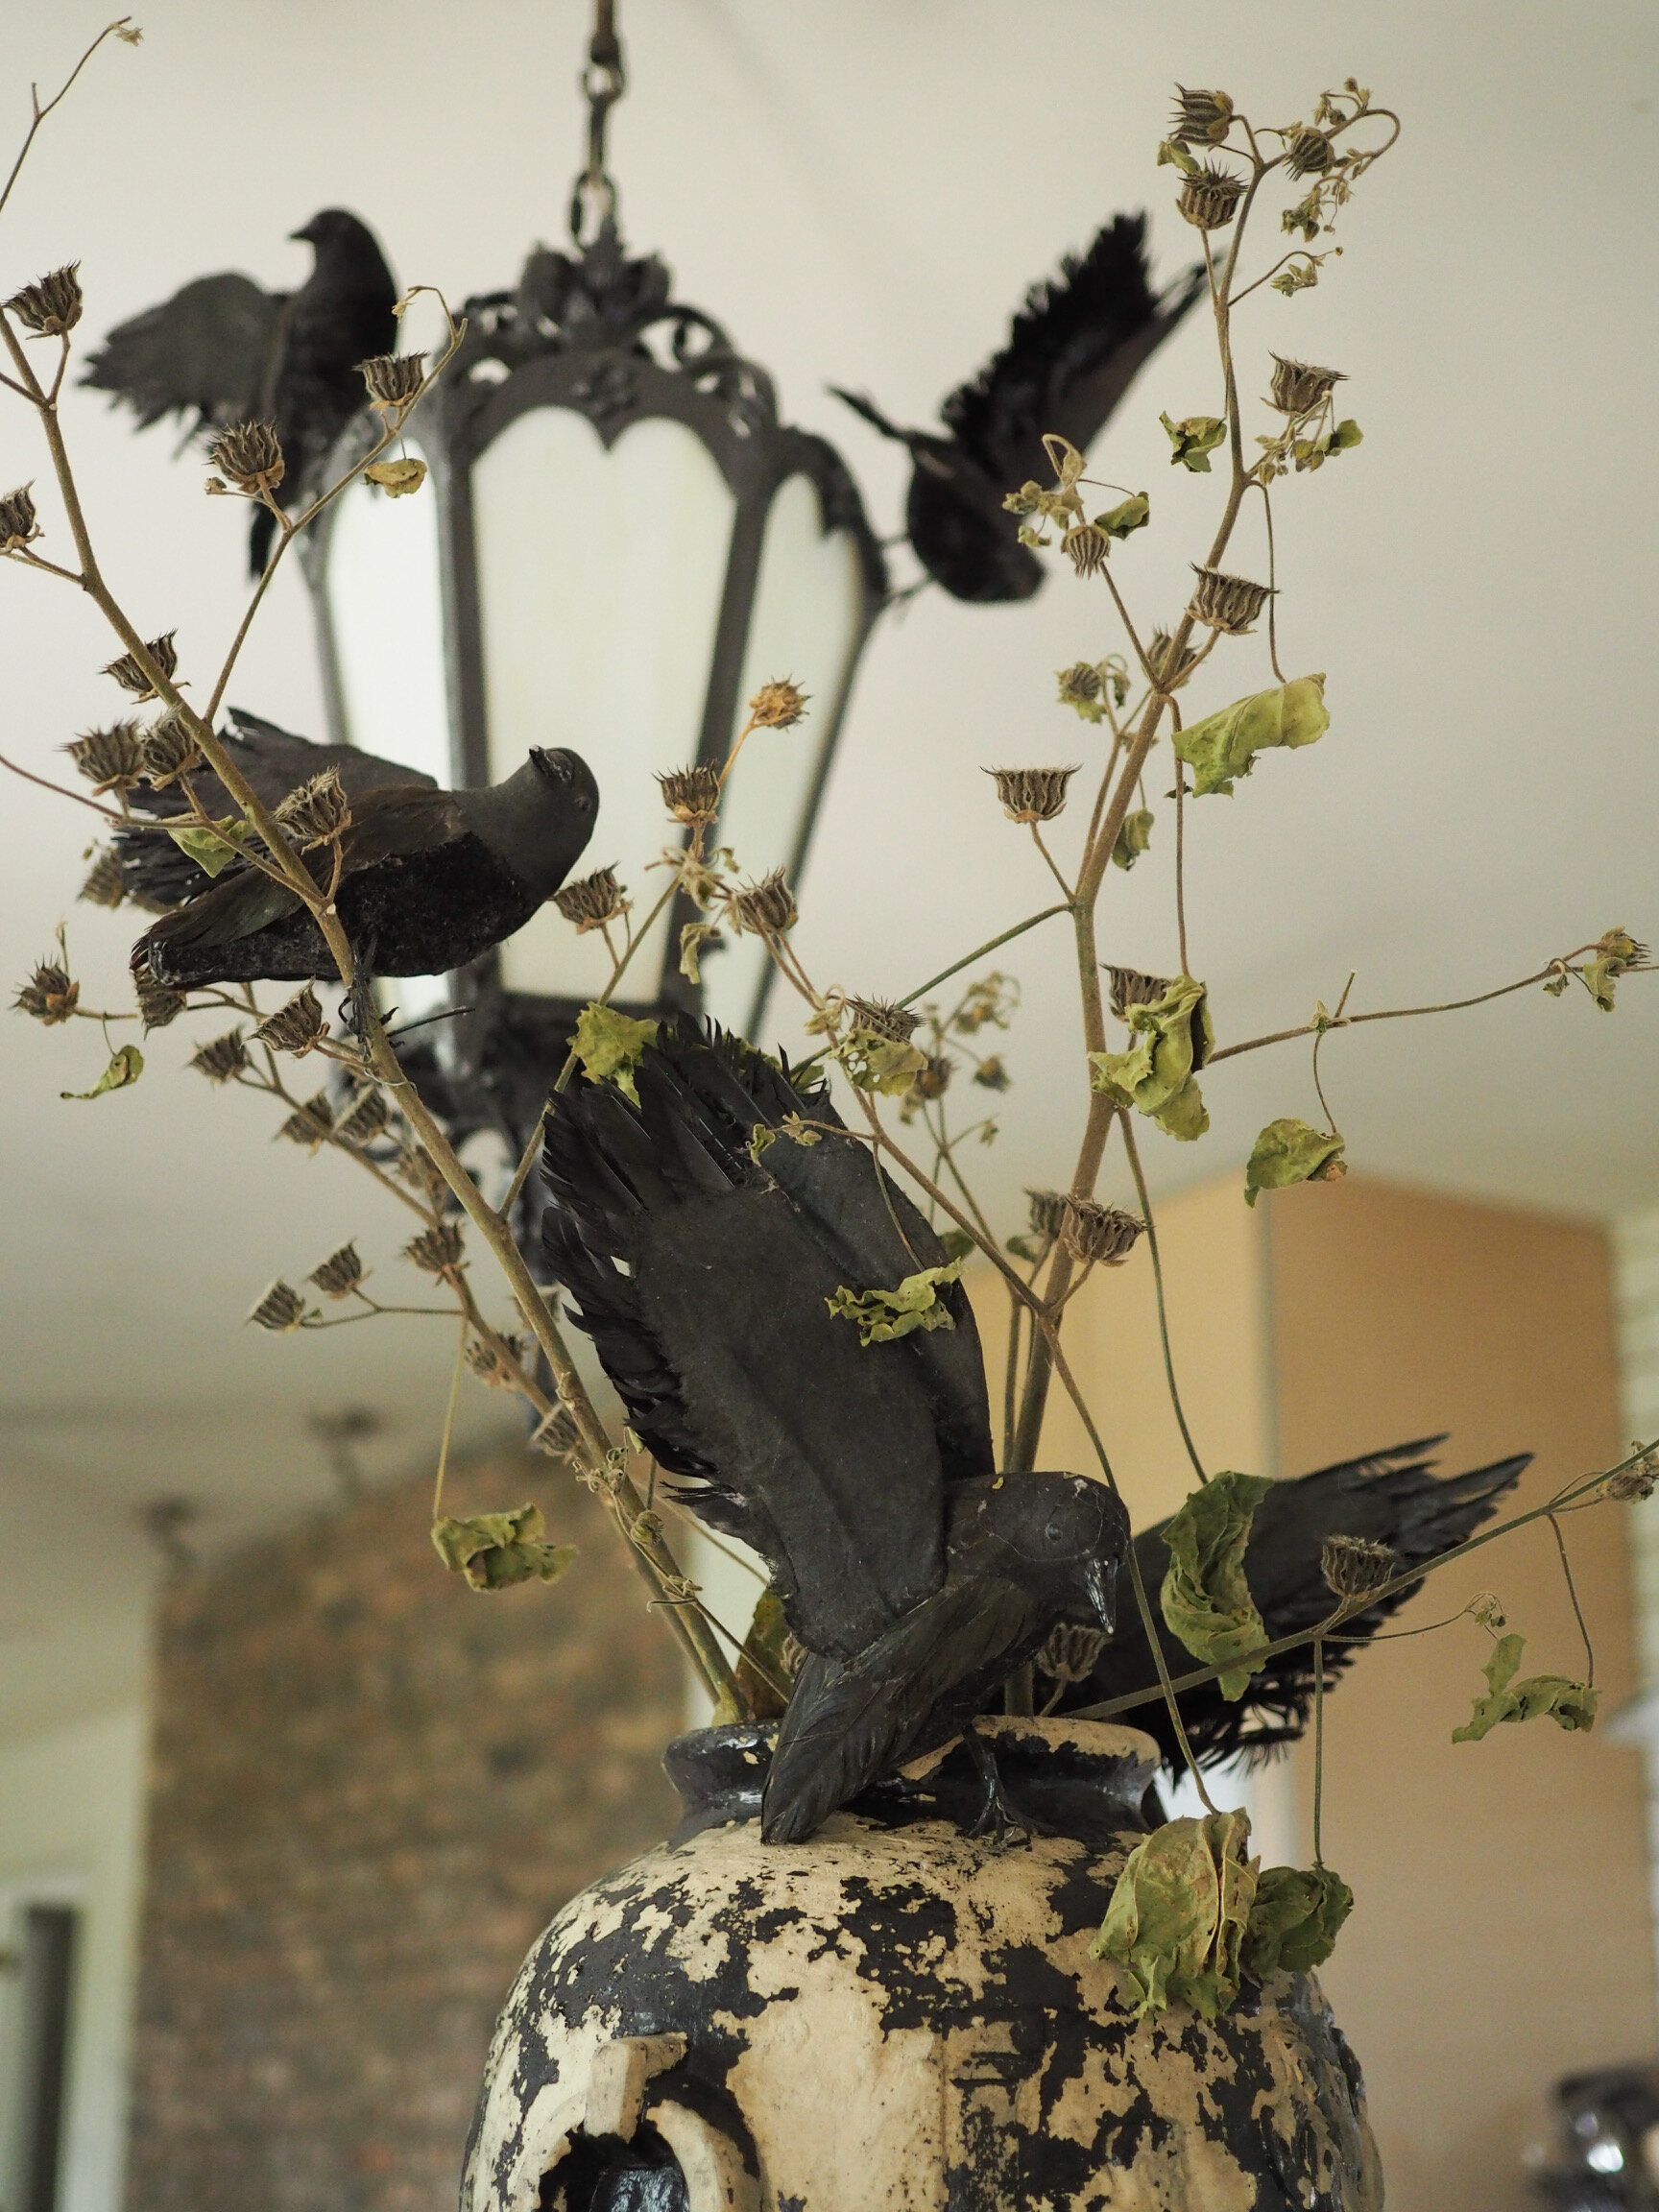 These black birds have descended upon our kitchen island